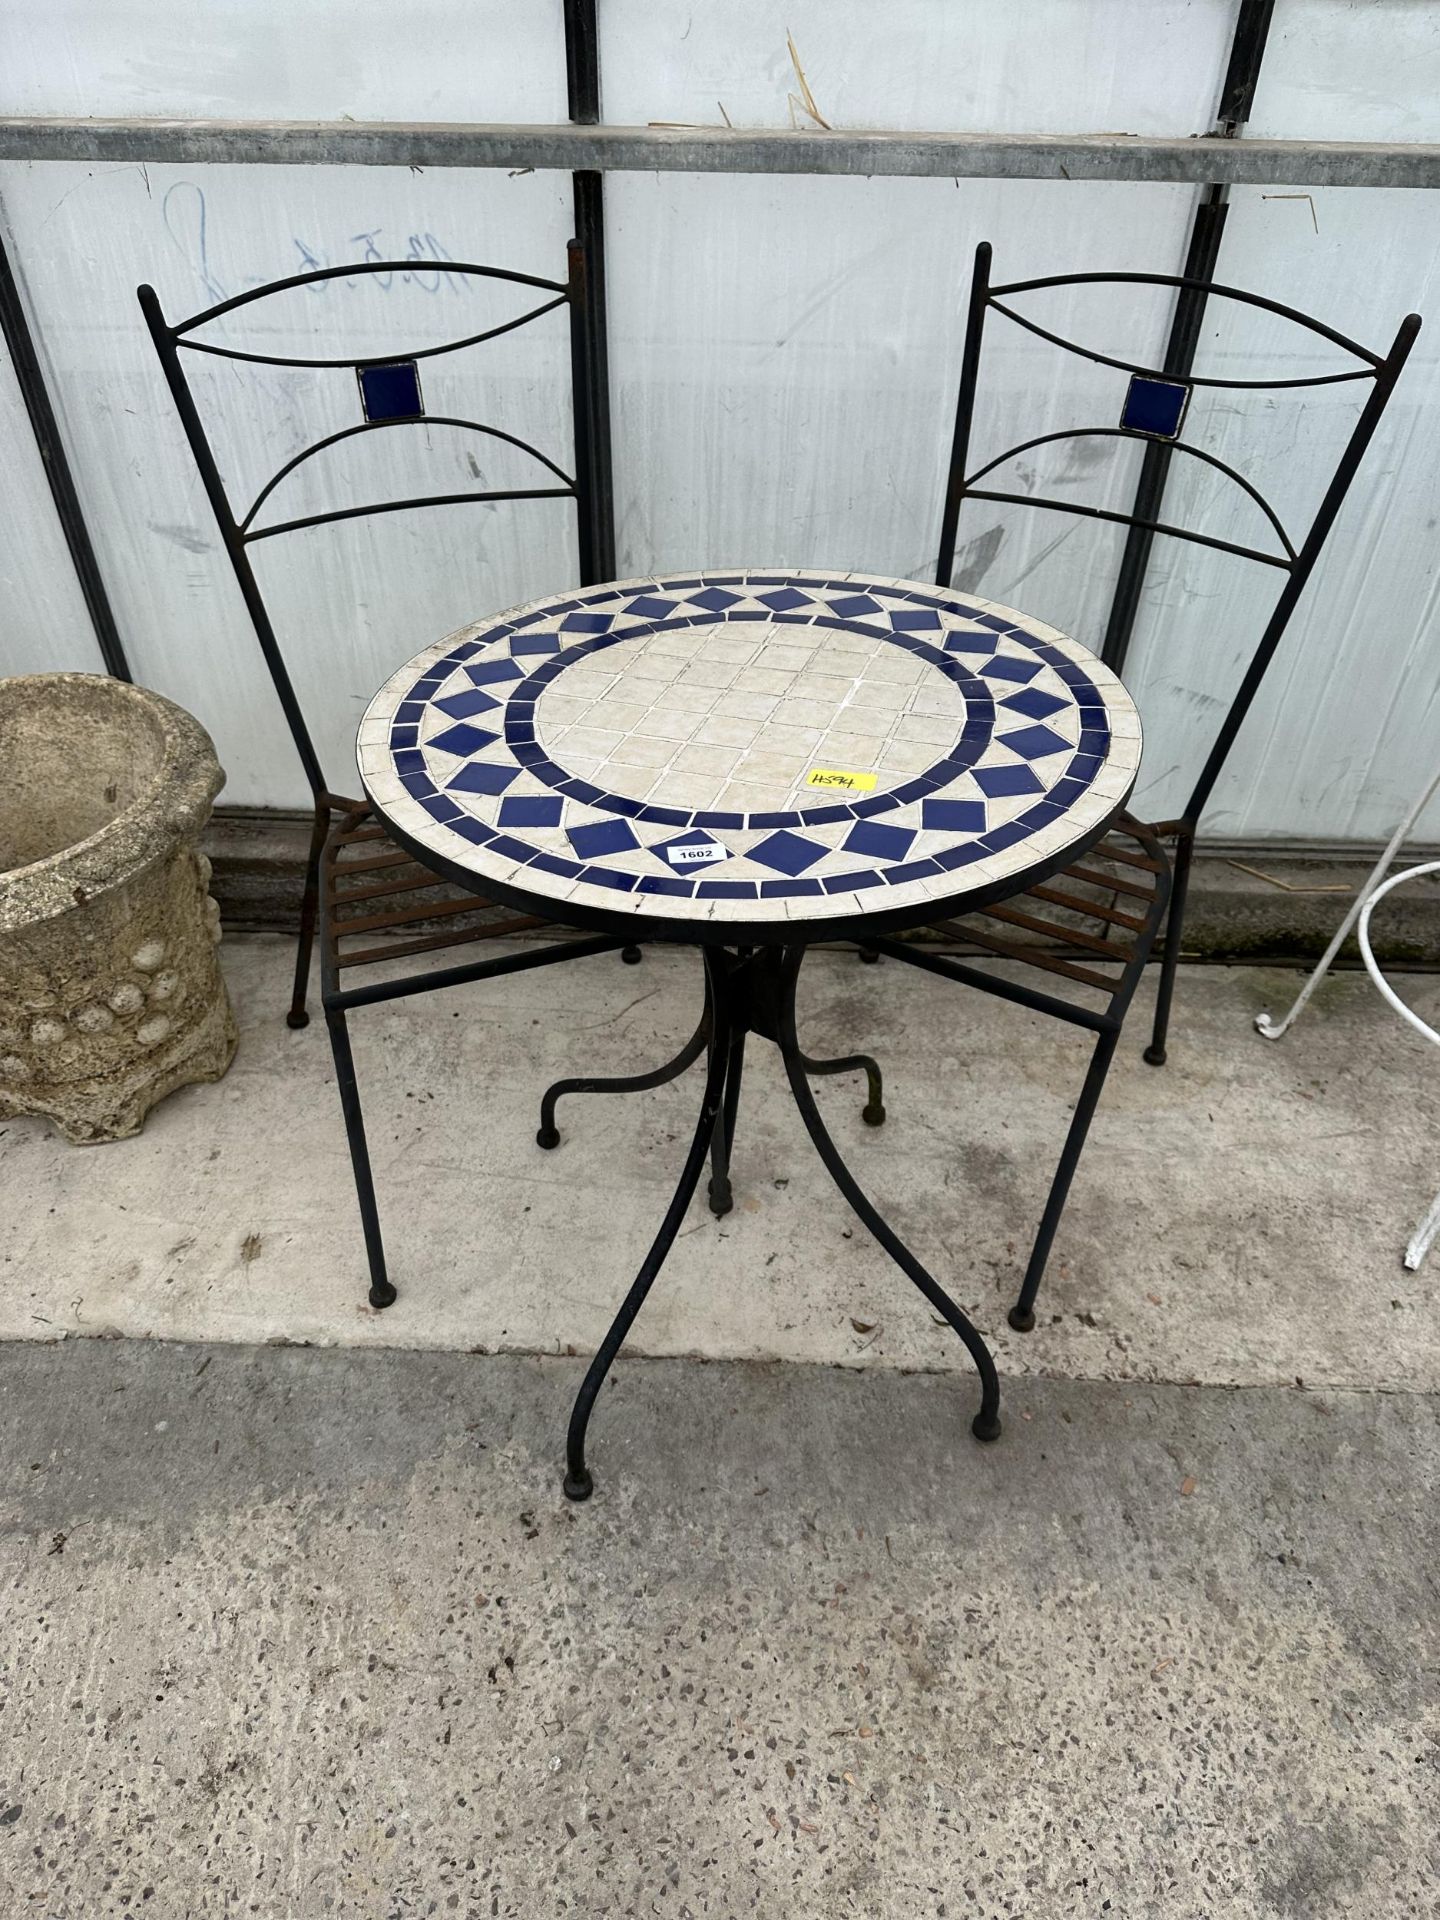 A TILE TOPPED ROUND BISTRO TABLE WITH TWO FOLDING CHAIRS